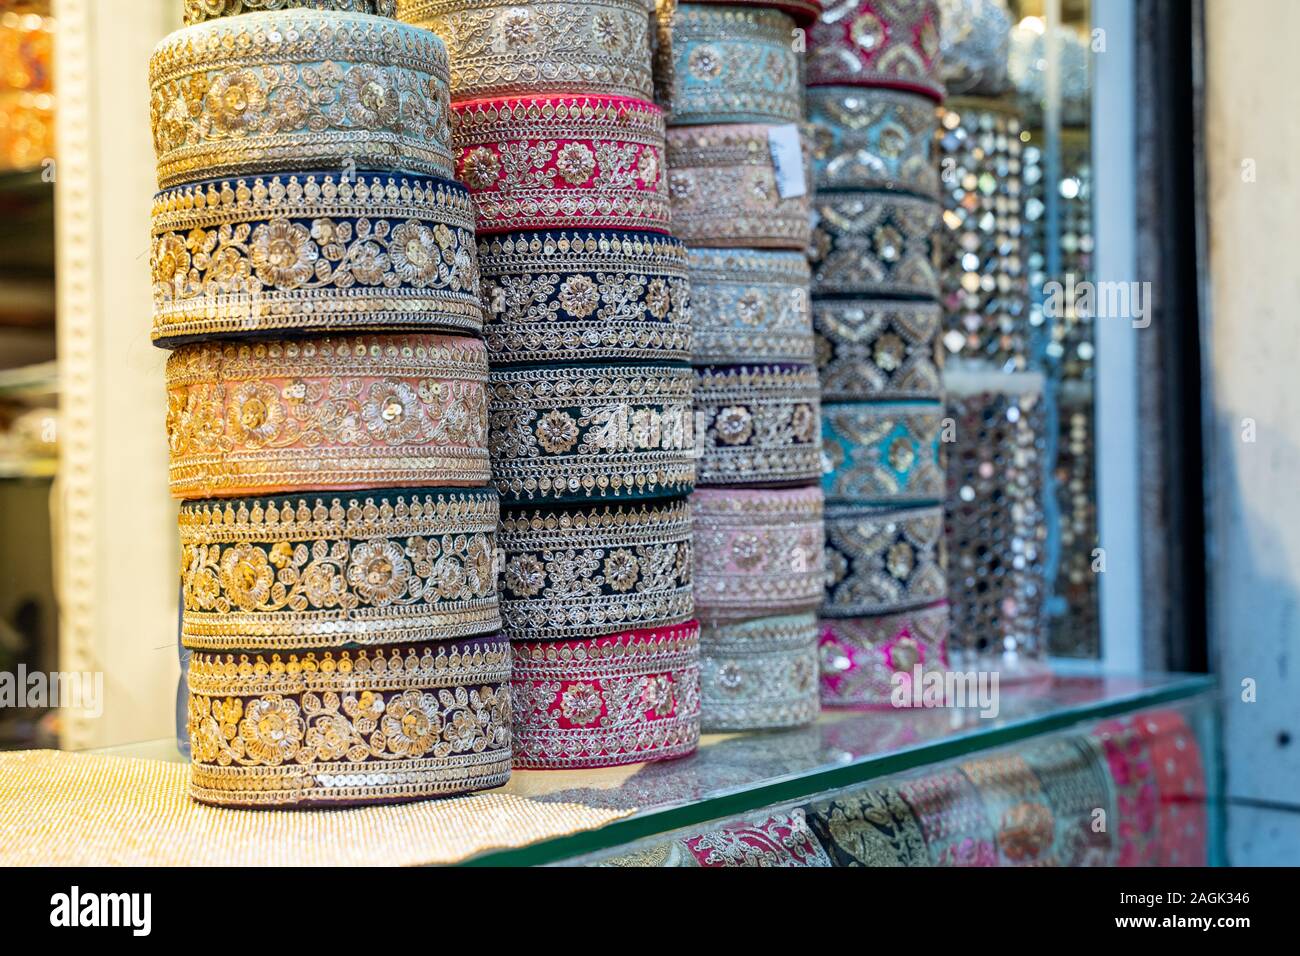 Colorful metallic brocade decorations on display for sale in Chandi Chowk Old Delhi. These flowers, beads and bells designs are popular in weddings, f Stock Photo